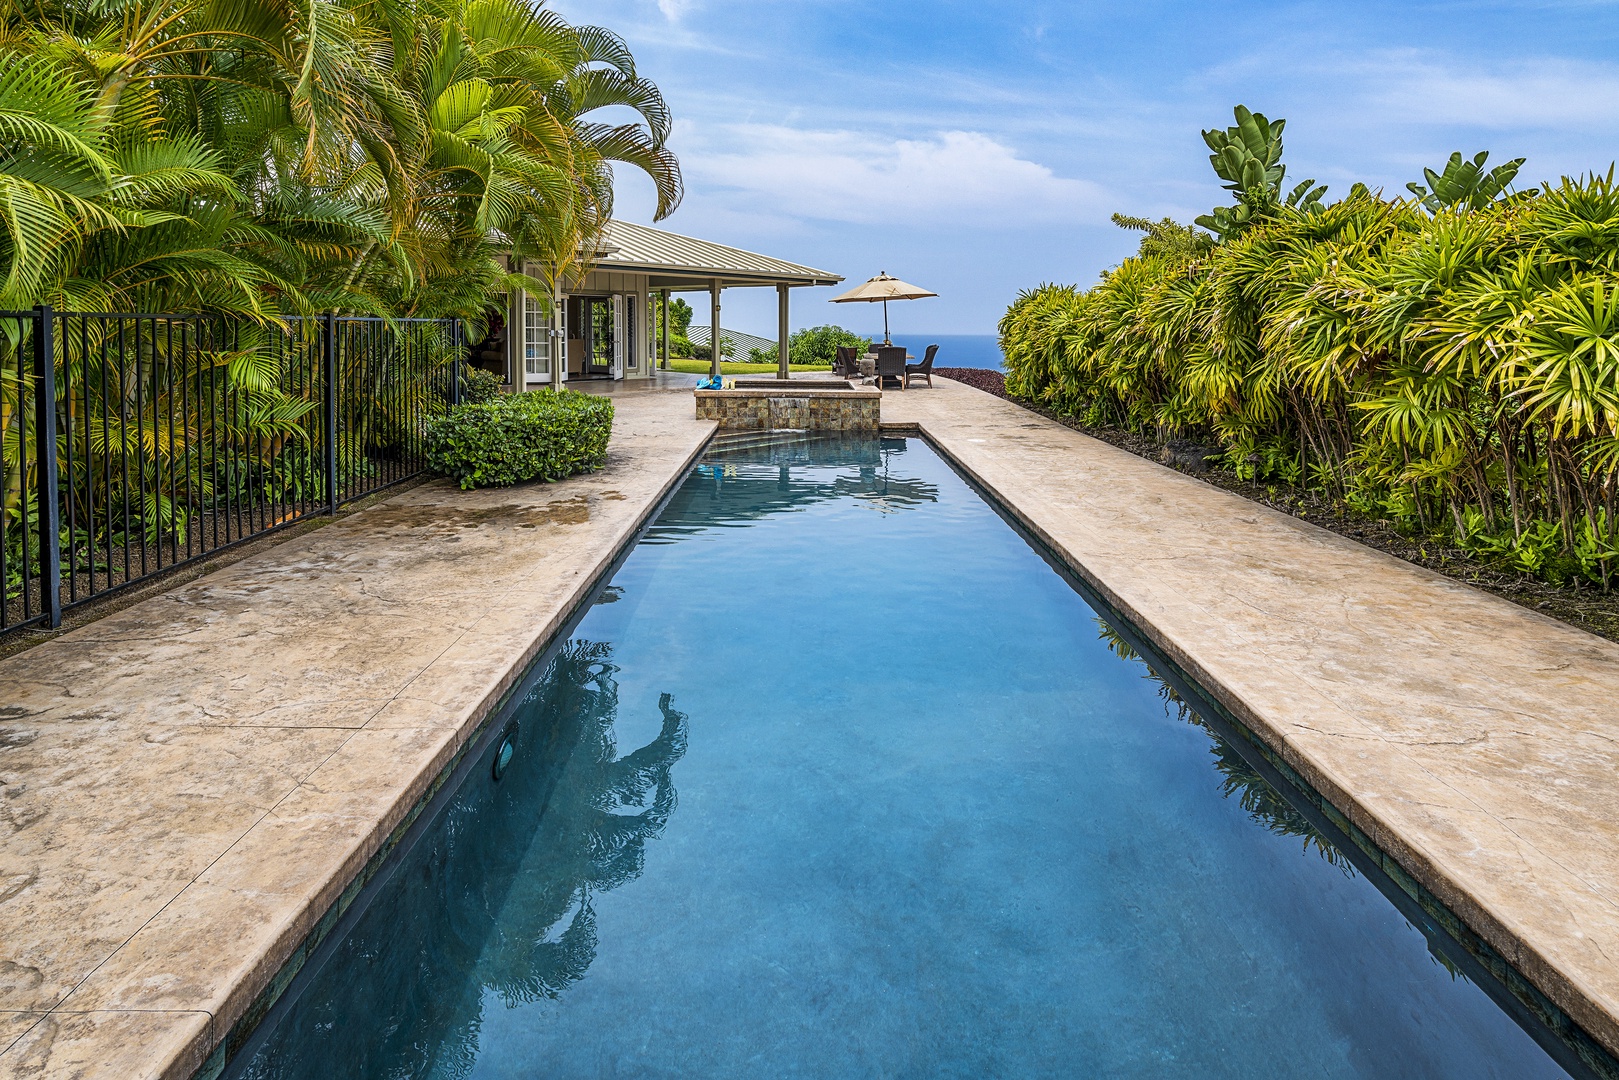 Kailua Kona Vacation Rentals, Sunset Hale - Lap pool makes for a great exercise!